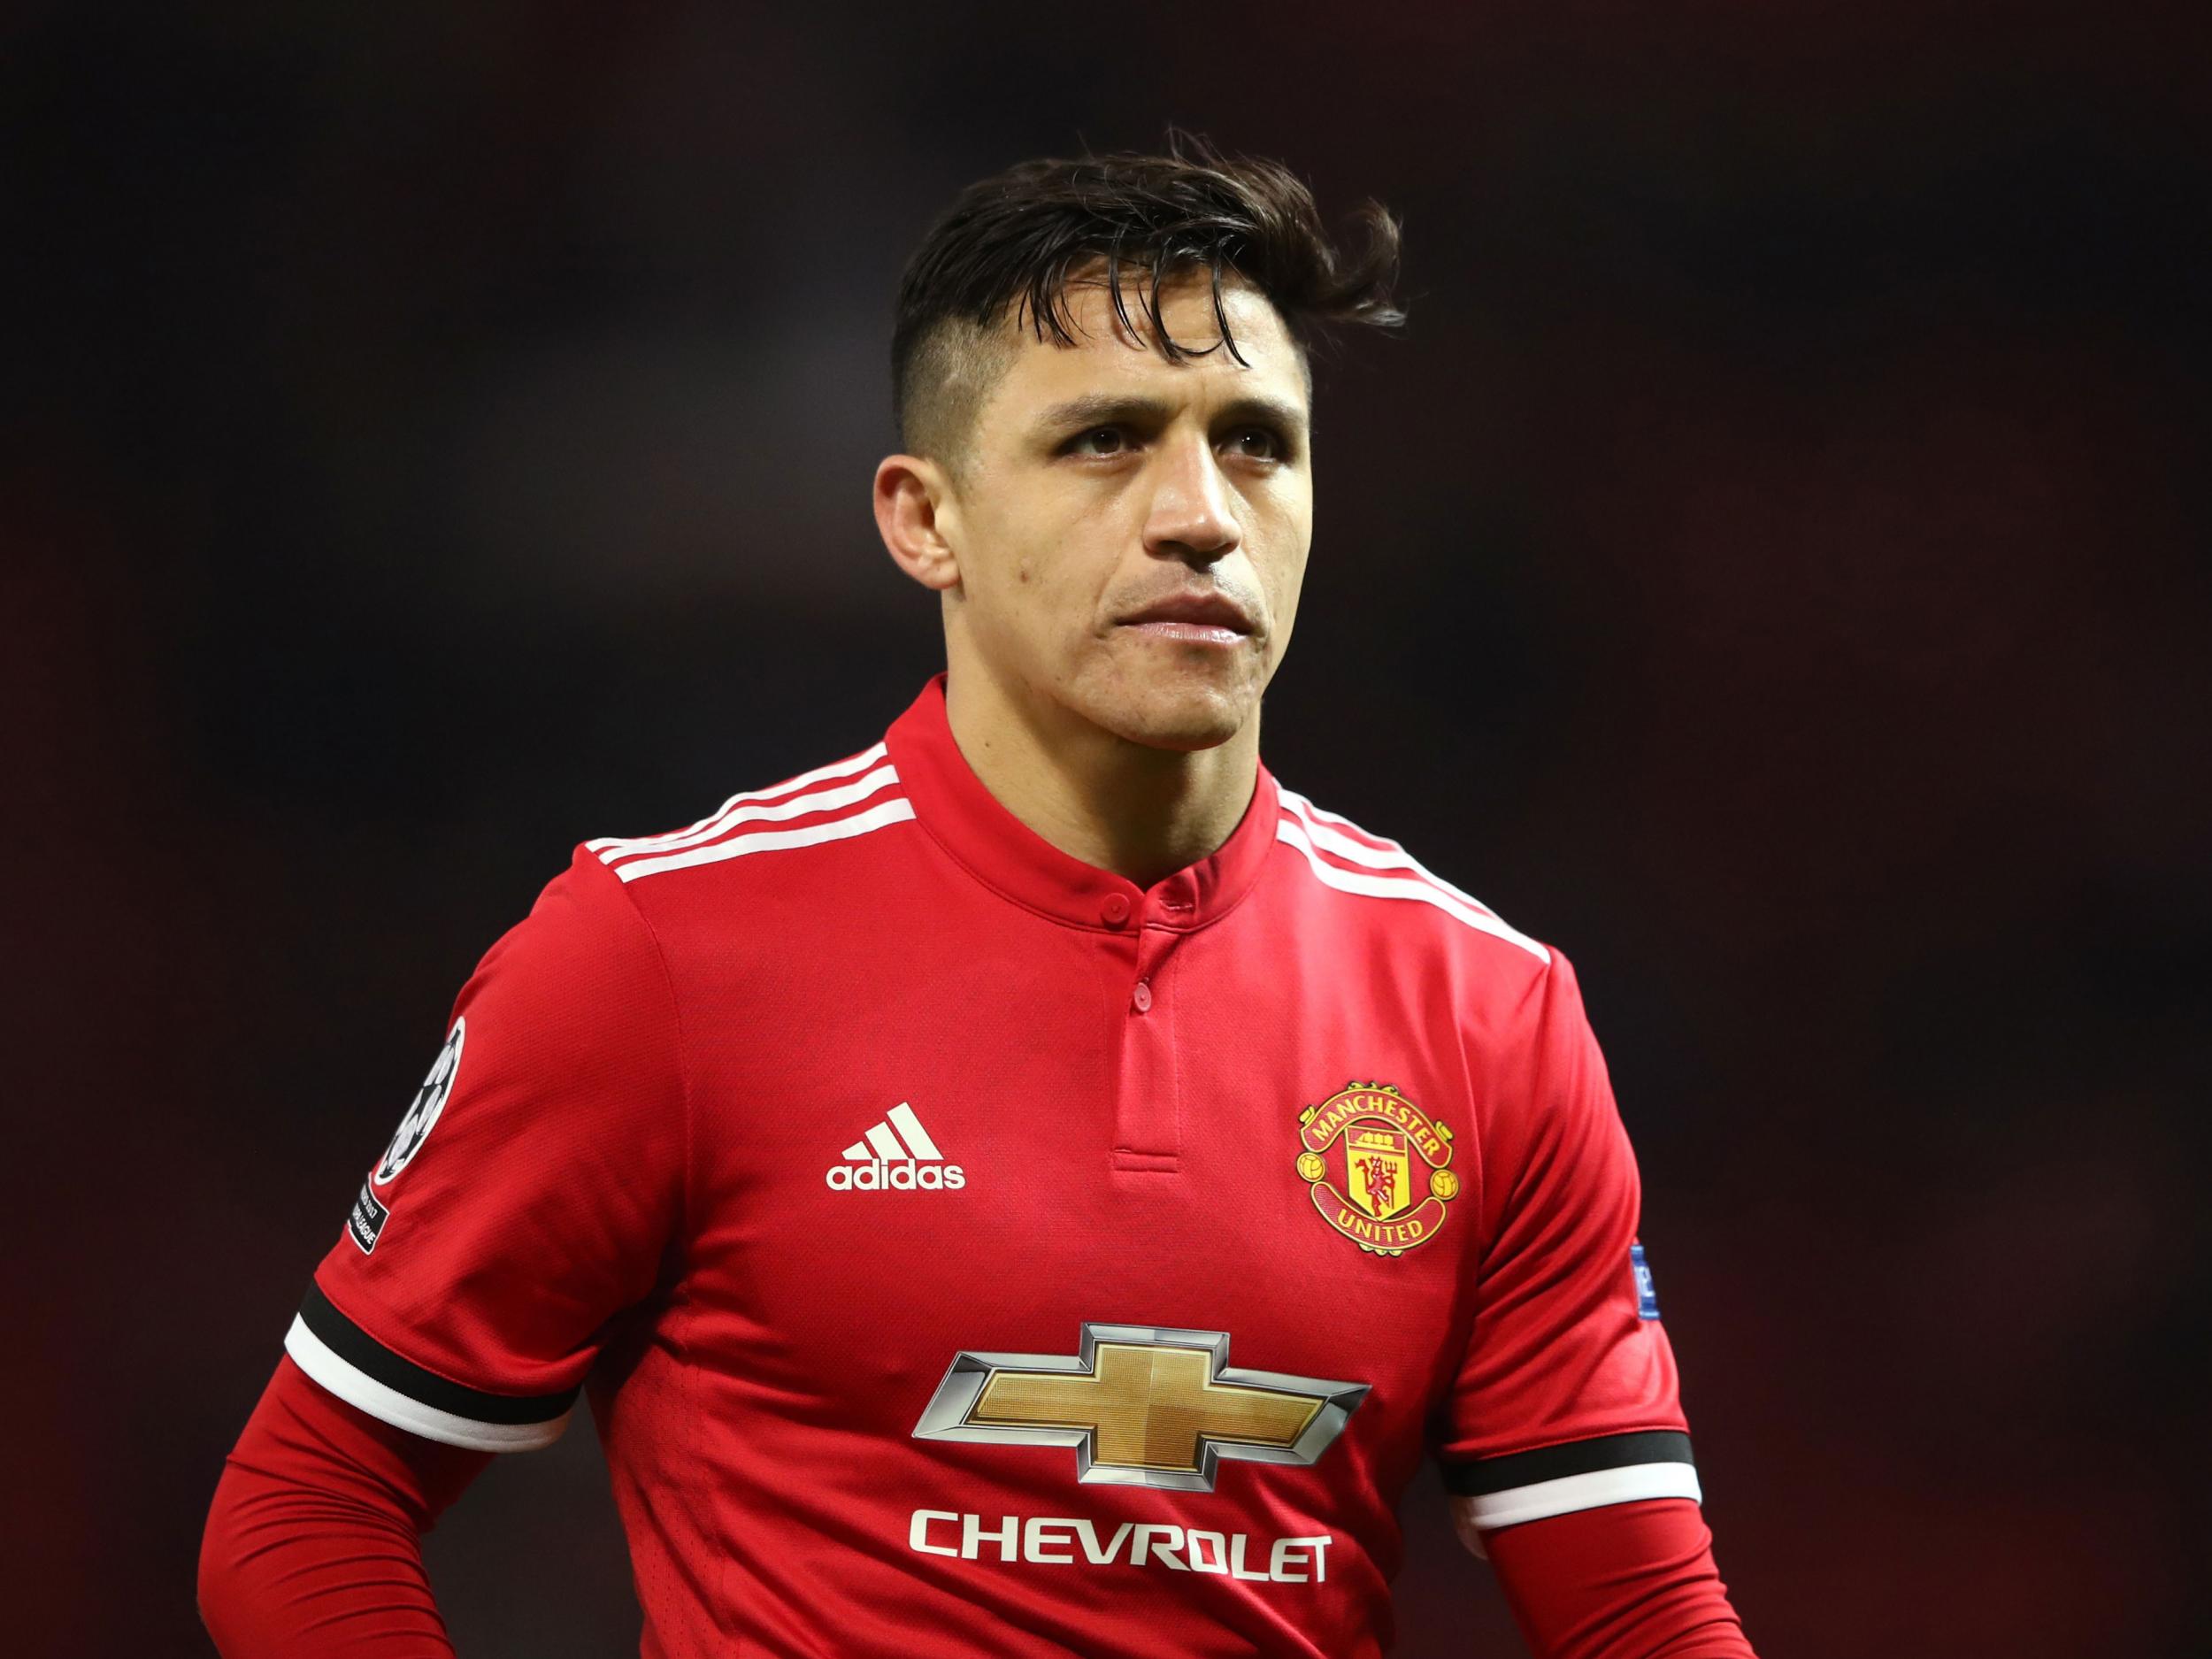 Manchester United\u002639;s Alexis Sanchez wants to end career back in Chile  The Independent